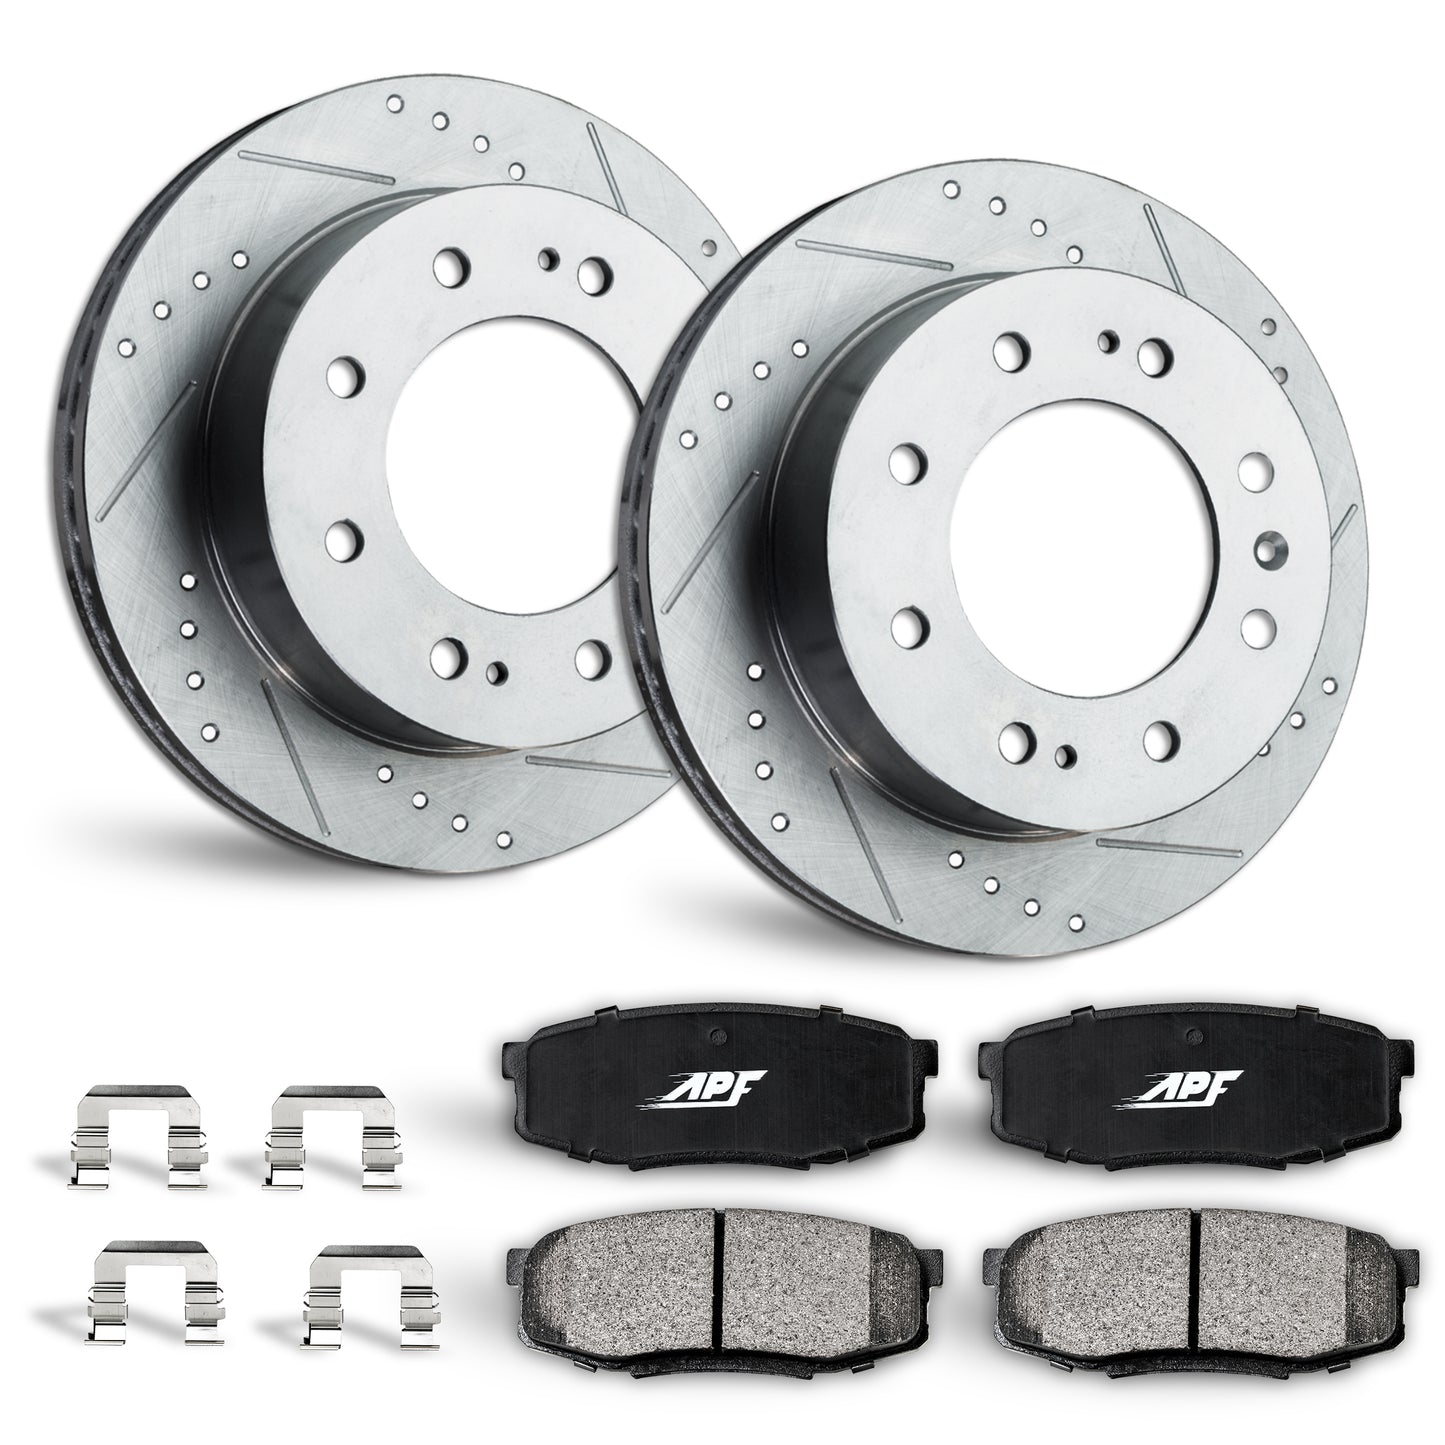 APF Rear Brake Kit compatible with GMC Savana 4500 2009-2019 | Zinc Drilled Slotted Rotors with Ceramic Carbon Fiber Brake Pads